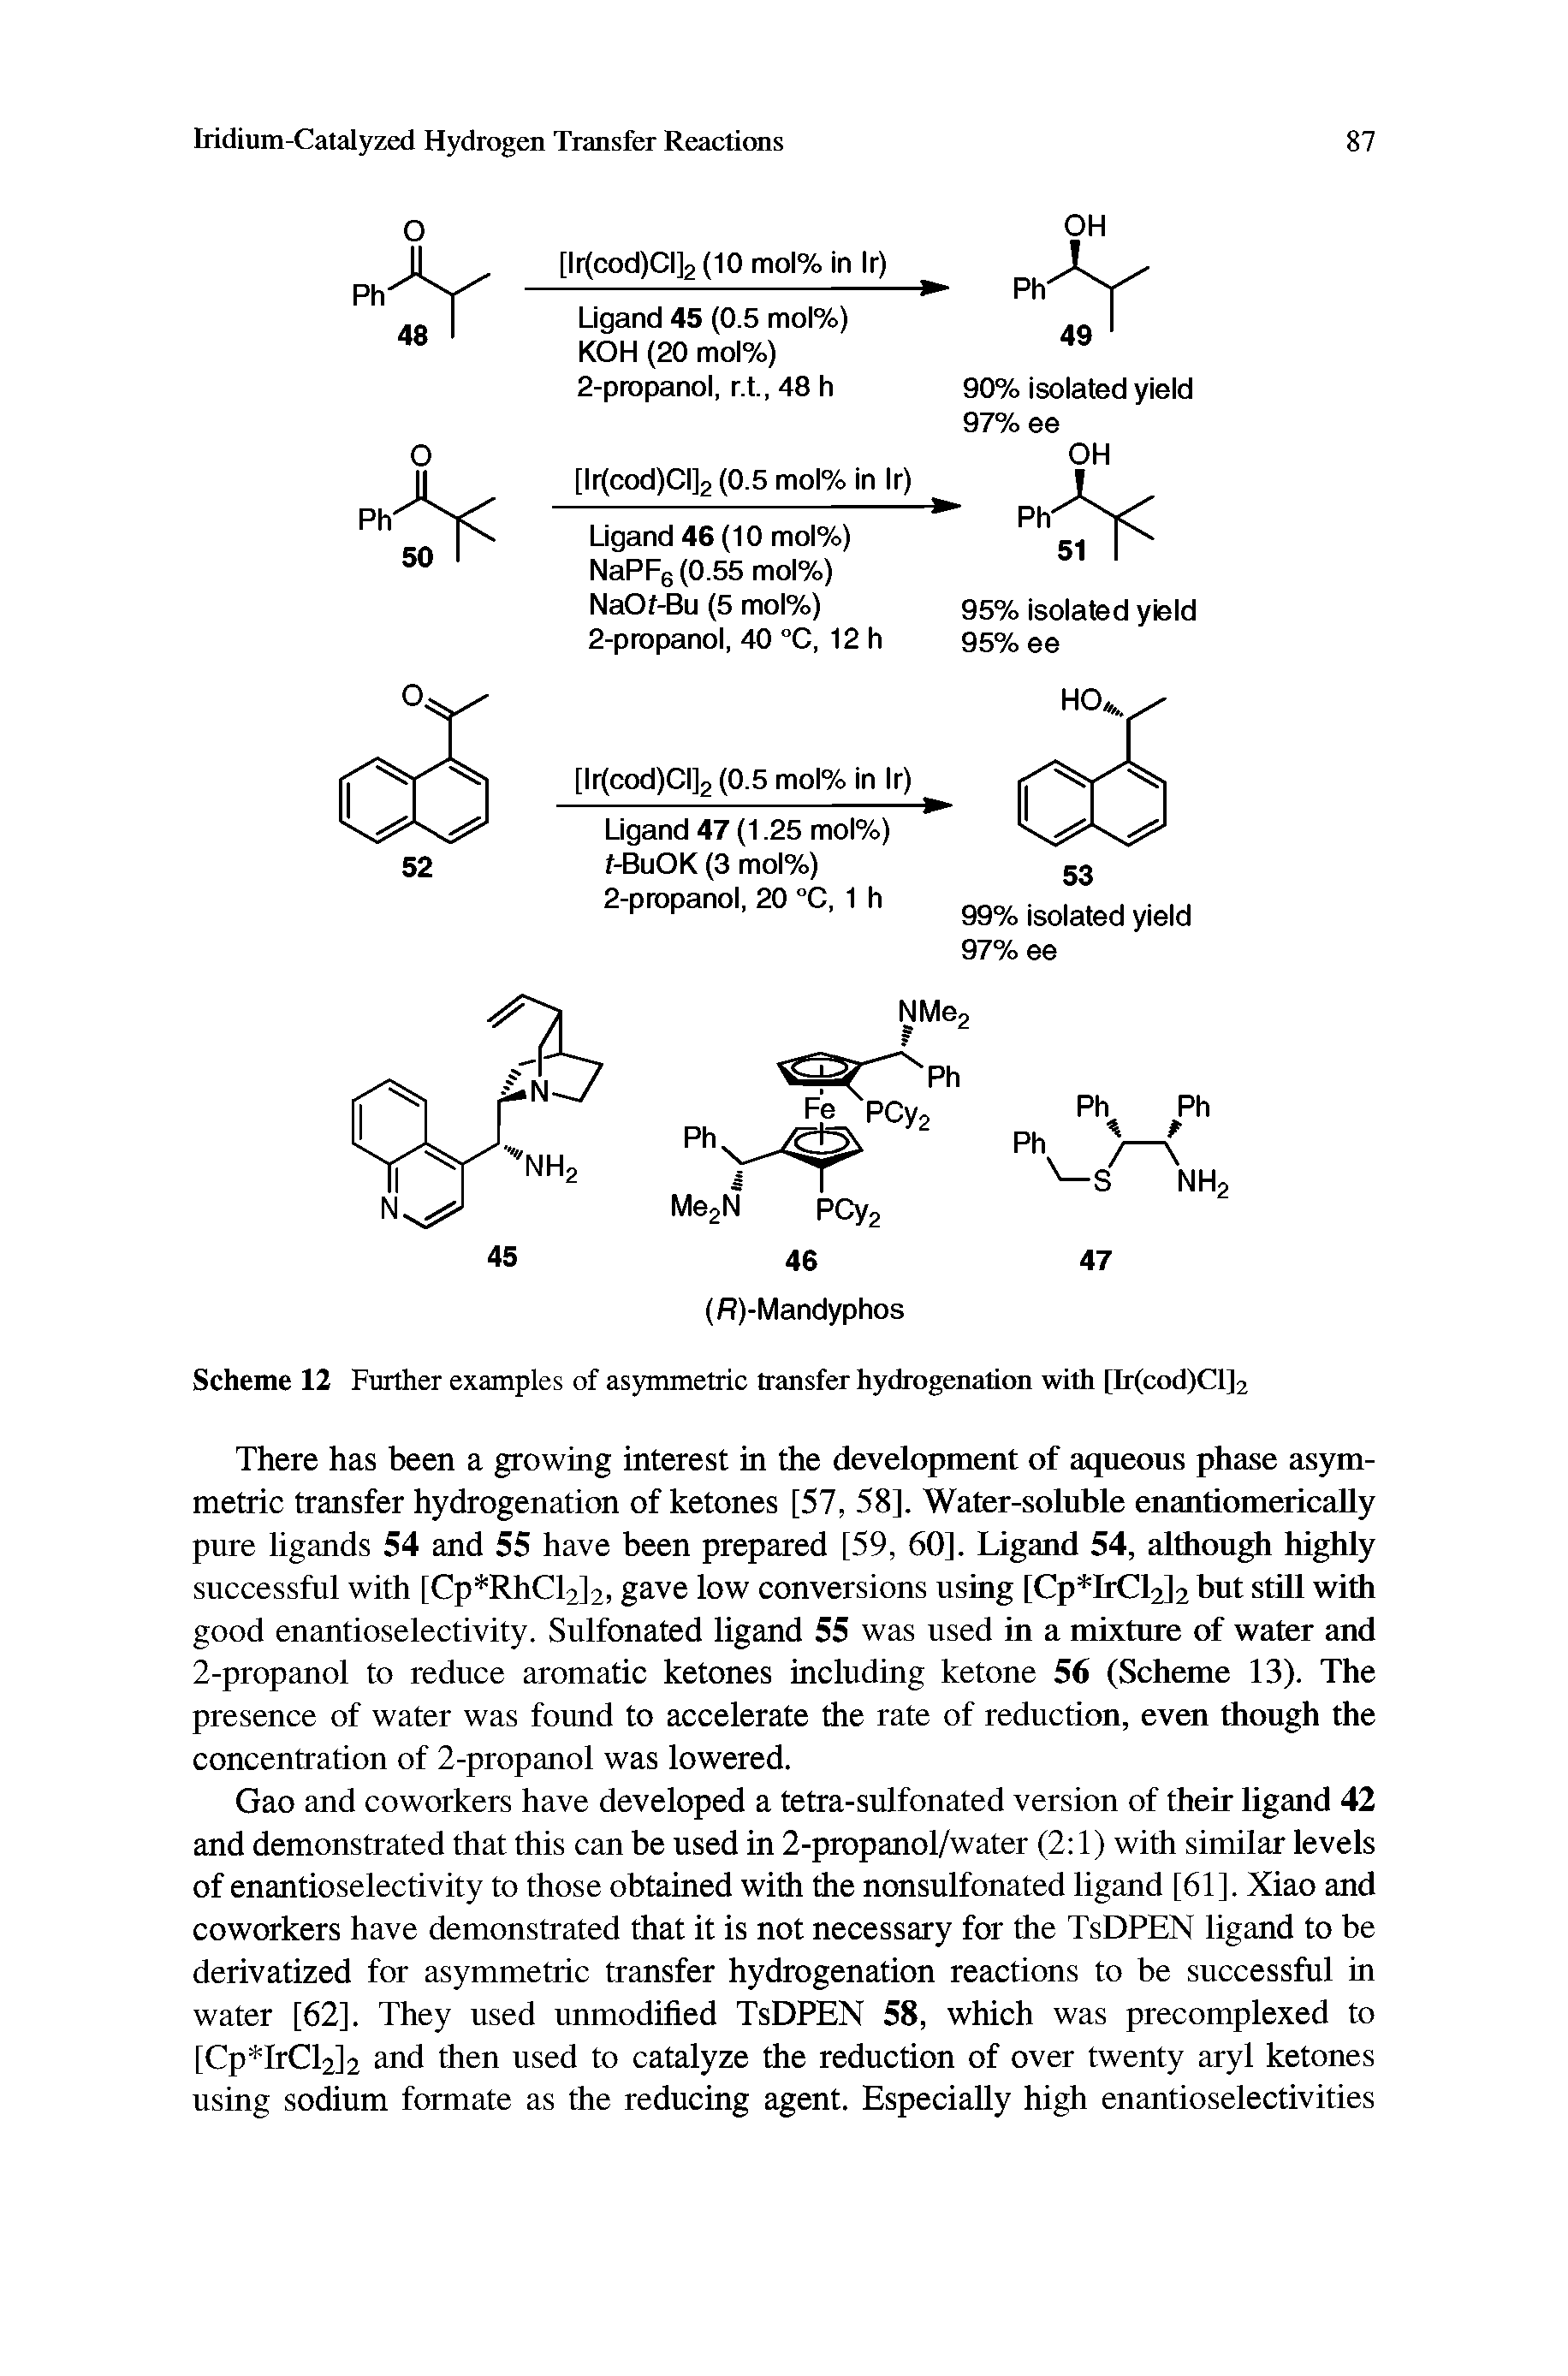 Scheme 12 Further examples of asymmetric transfer hydrogenation with [Ir(cod)Cl]2...